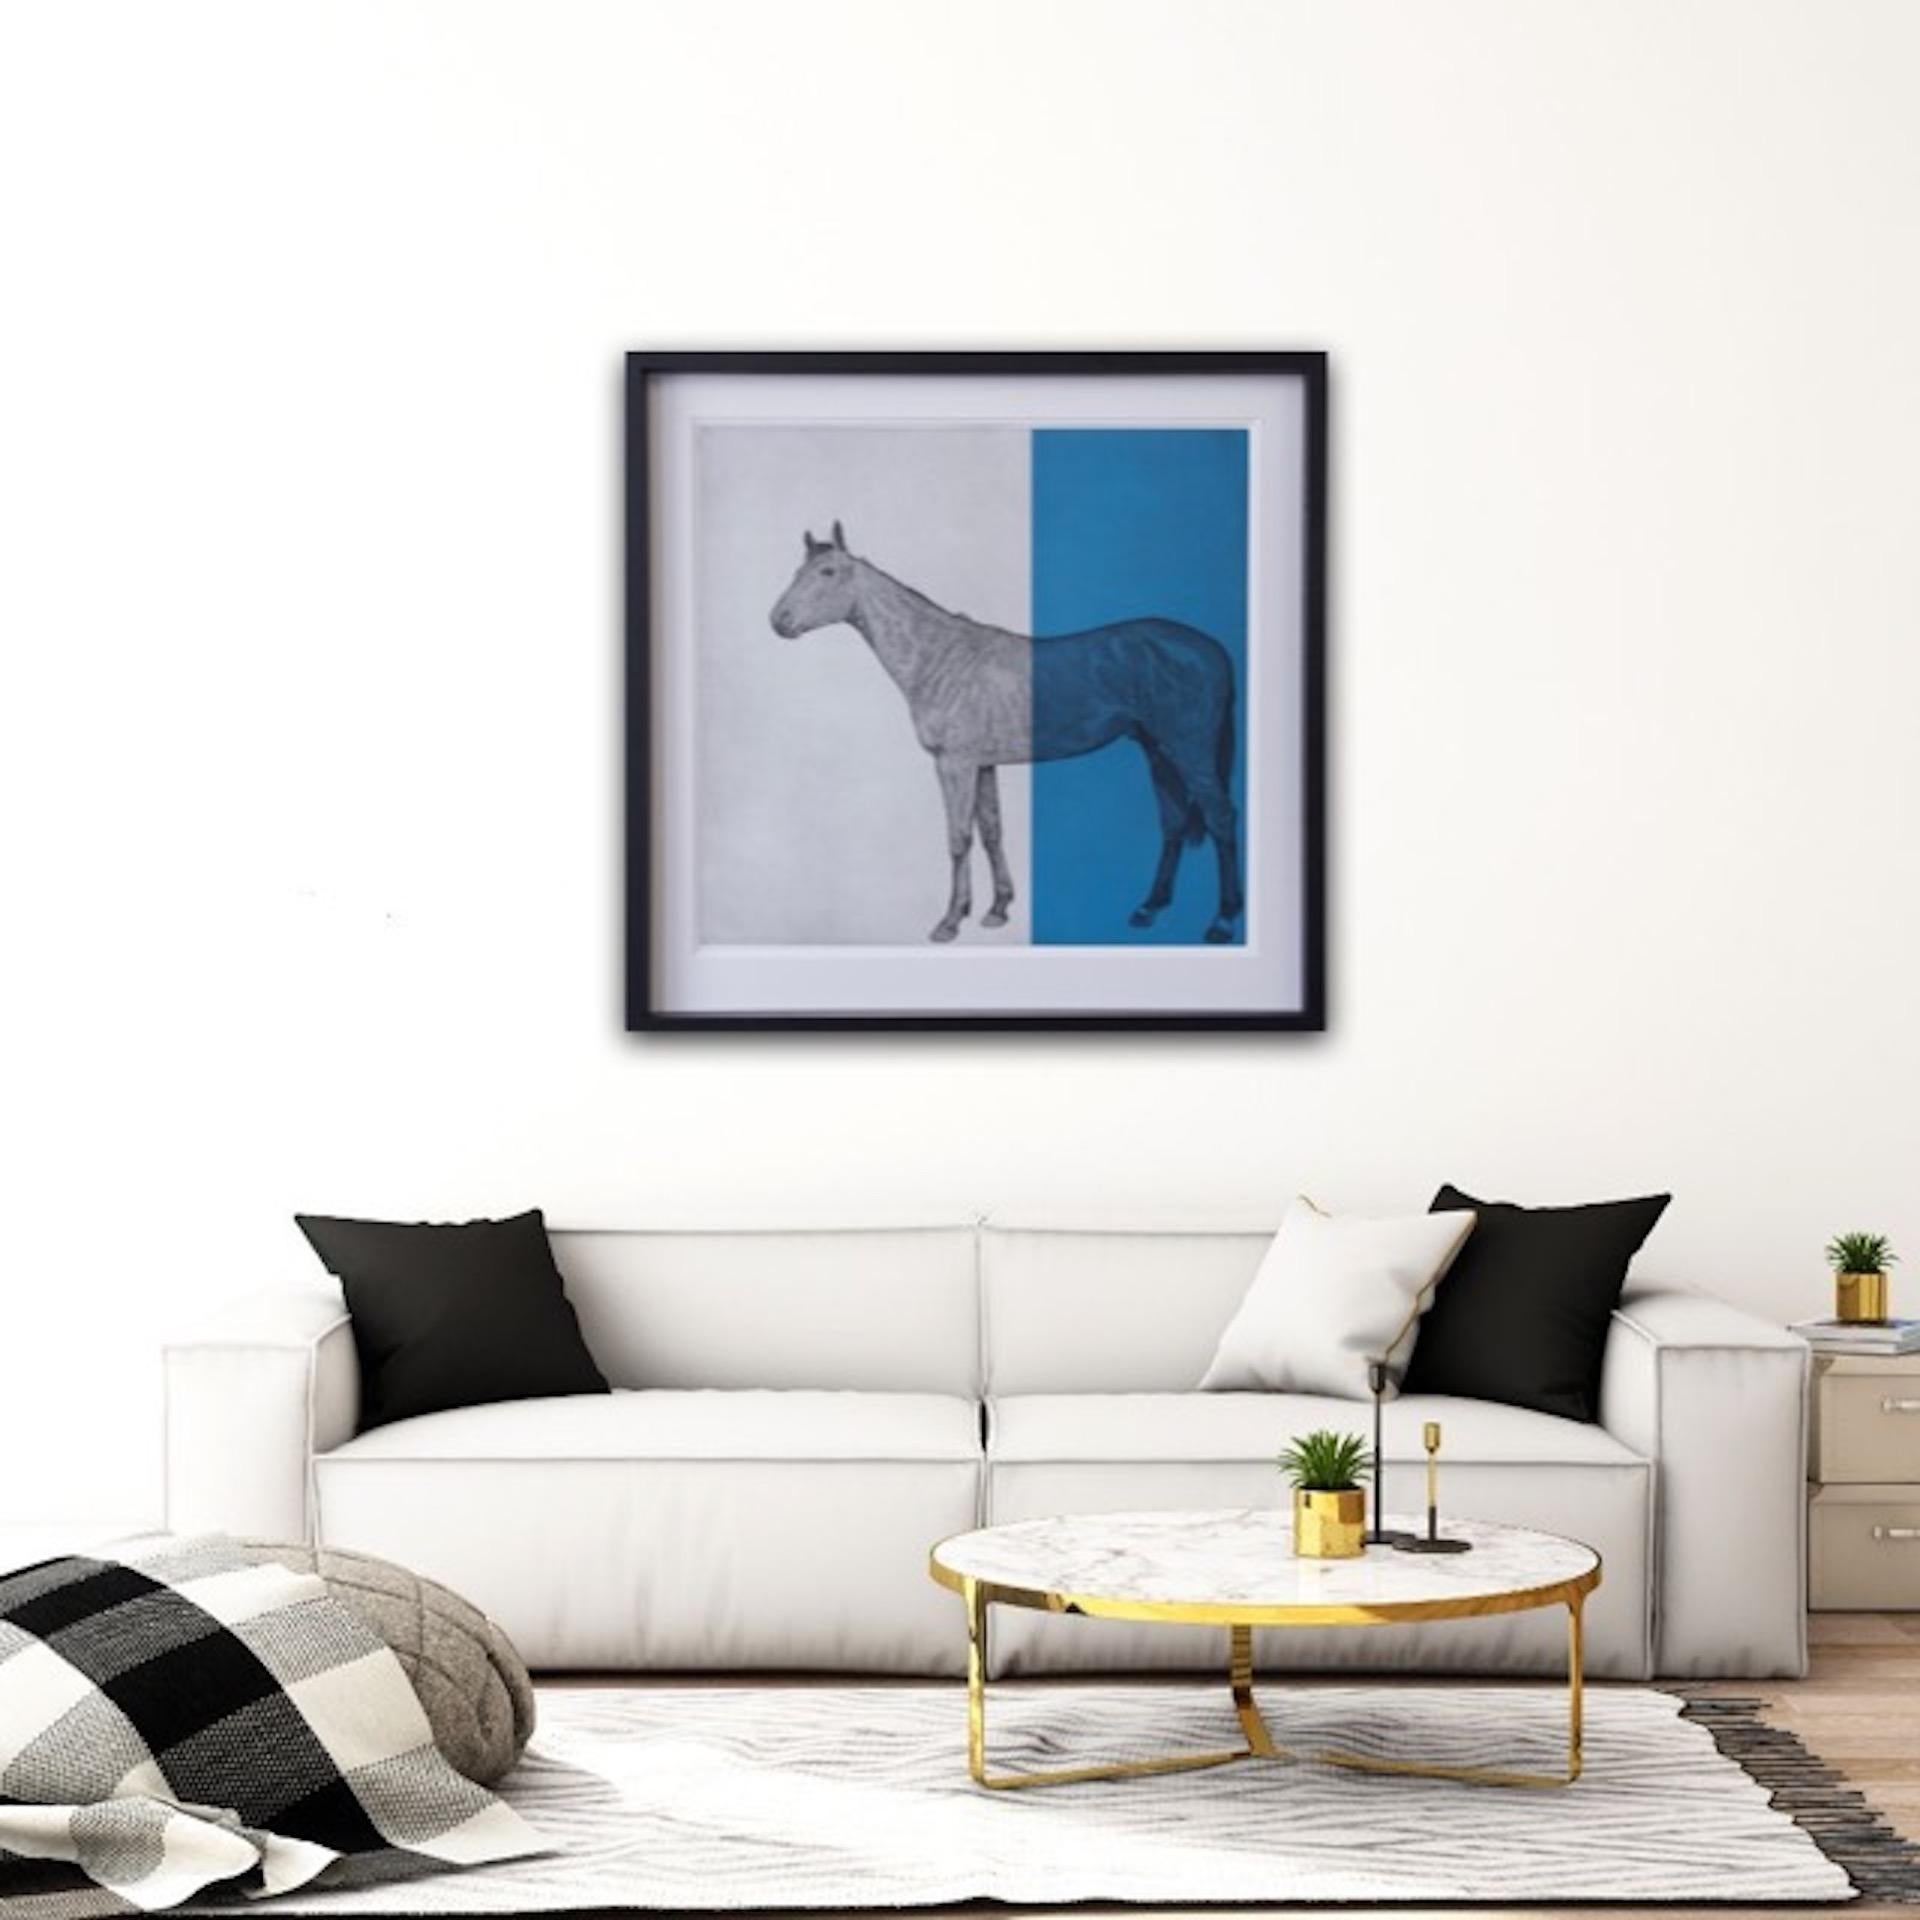 Guy Allen
Horse Study Blue
Limited Edition Etching with Screen Print Overlay
Edition of 45
Image Size: H 53.5cm x W 56.5cm
Sheet Size: H 80cm x W 77cm x D 0.1cm
Sold Unframed
Please note that in situ images are purely an indication of how a piece